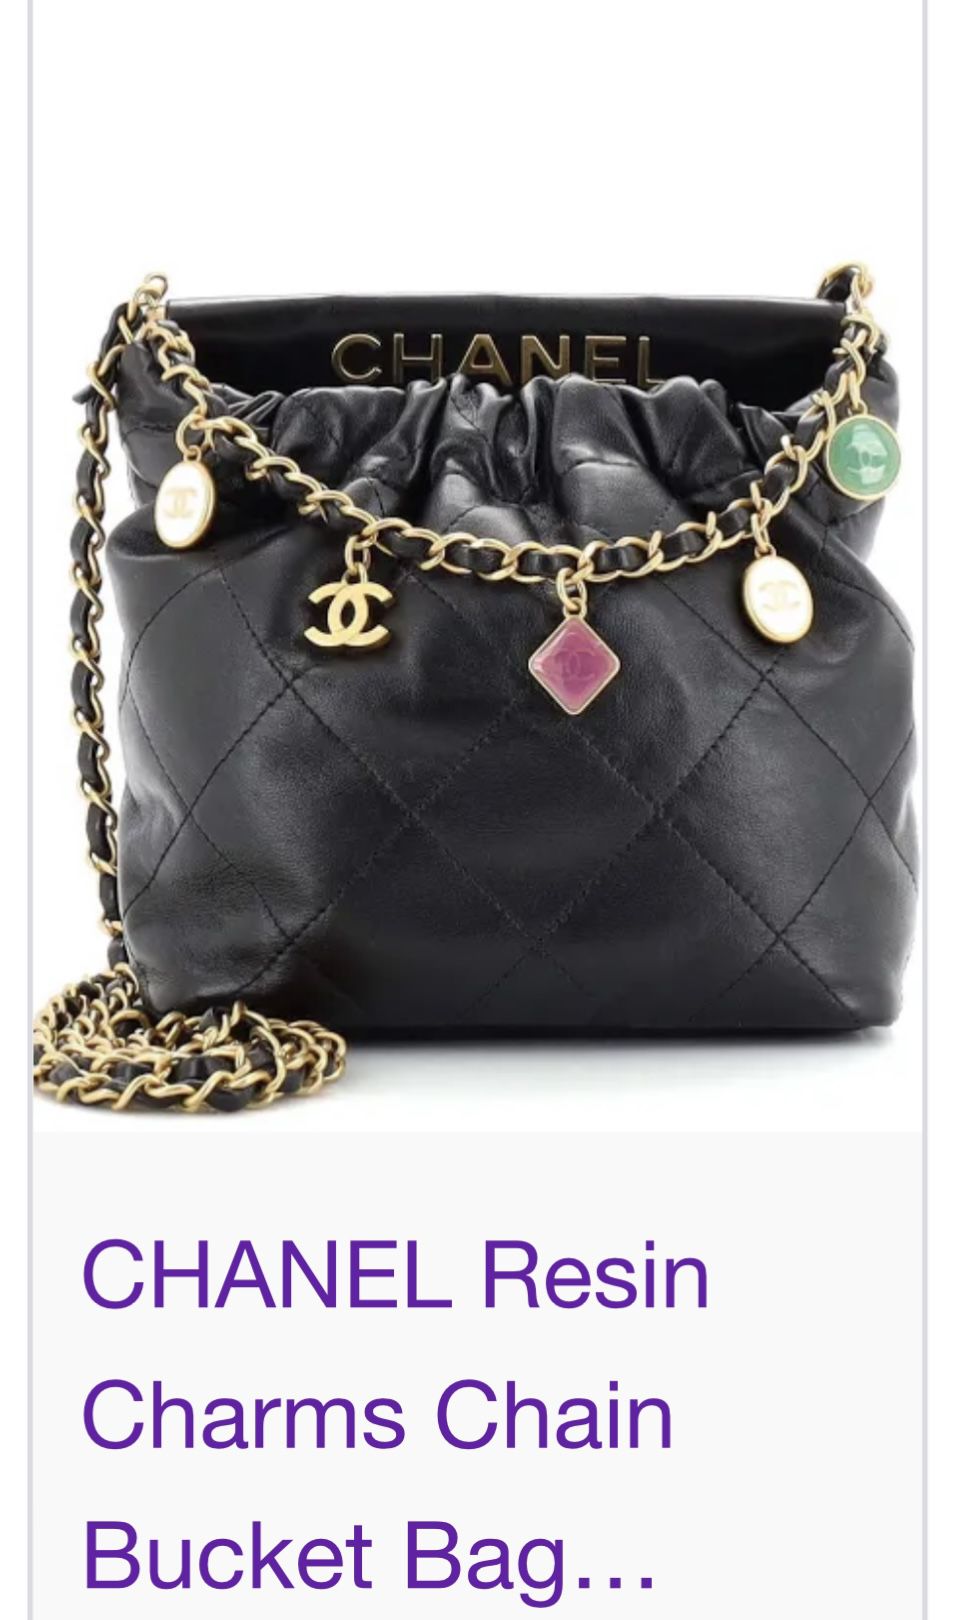 Chanel Small Bucket Bag for Sale in Sunny Isles Beach, FL - OfferUp